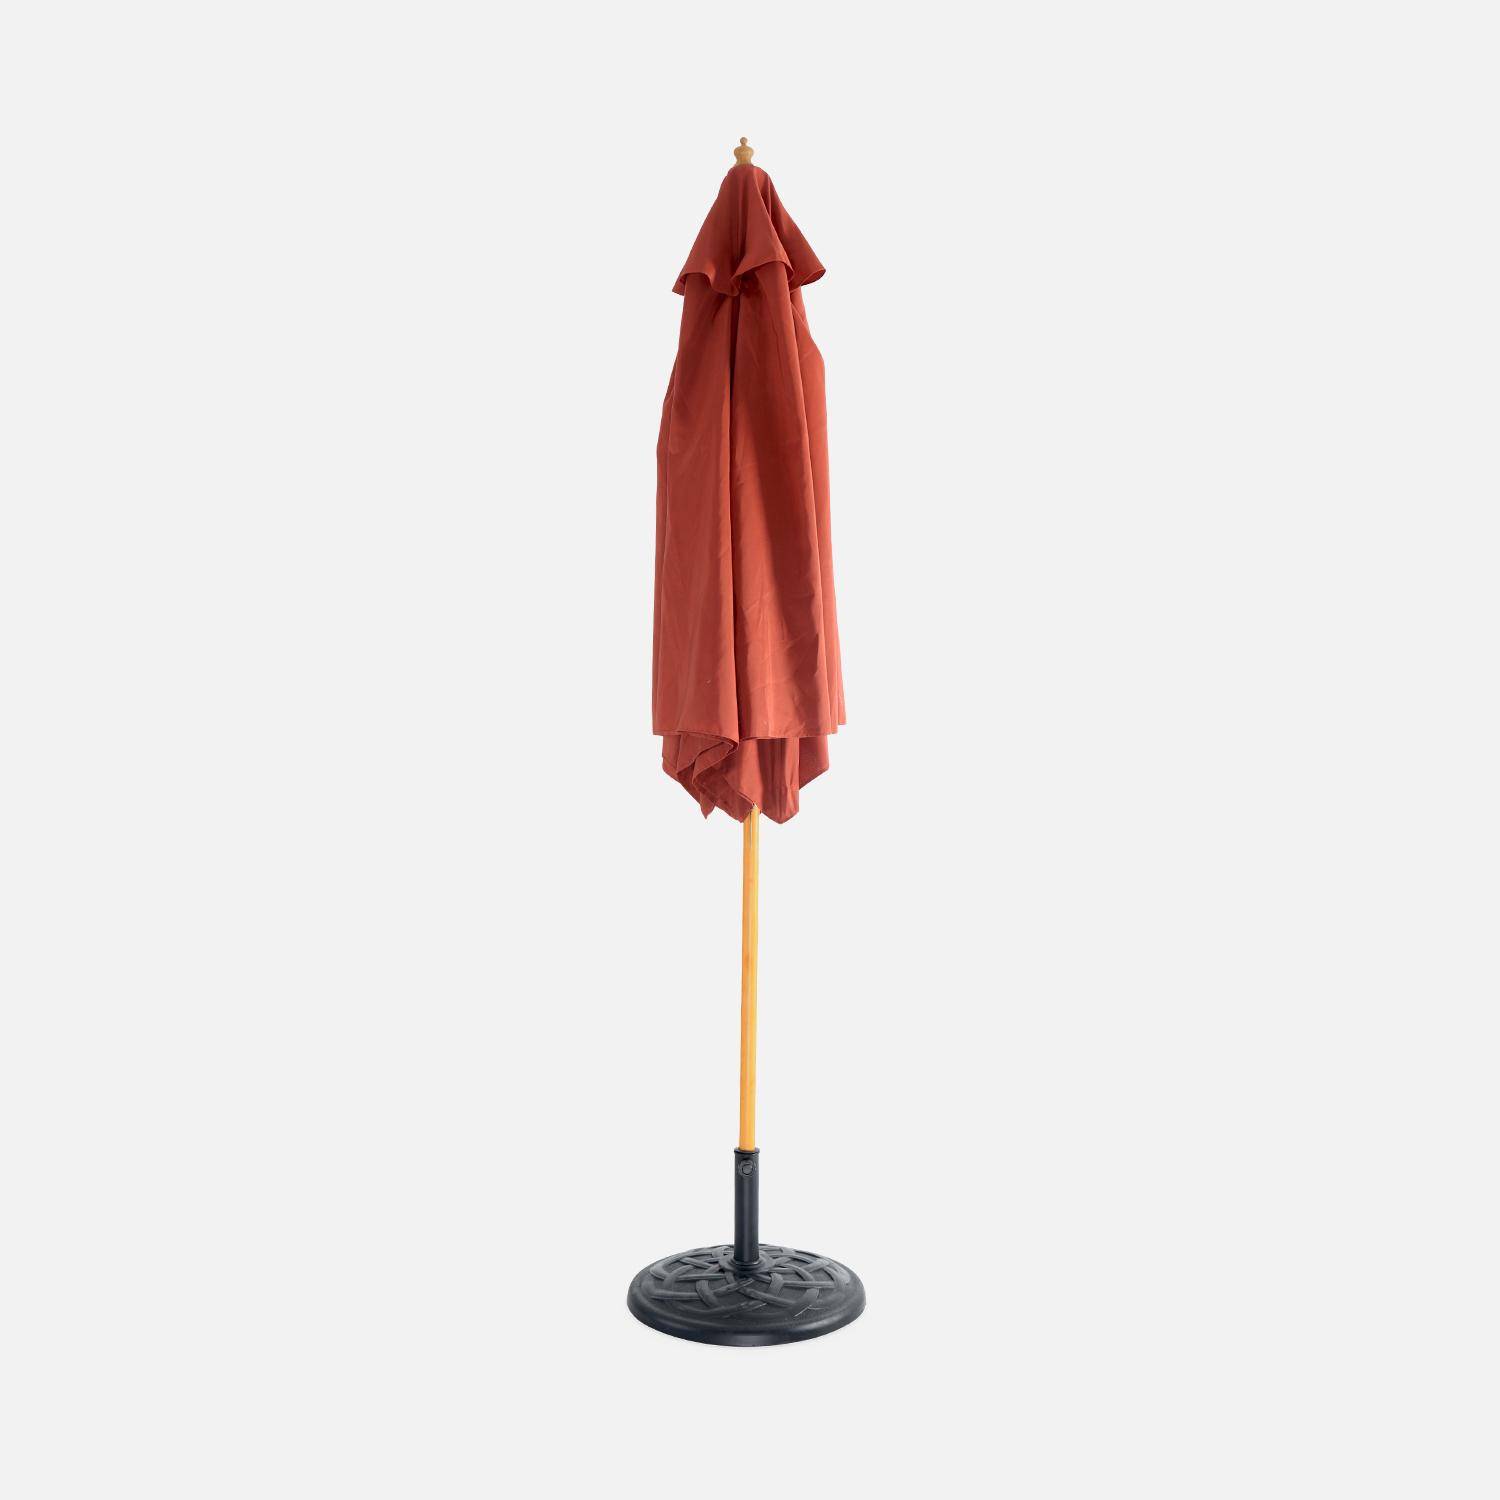 Round wooden parasol Ø300cm with straight pole -  adjustable aluminium central mast in wood and crank handle opening - Cabourg - Terracotta,sweeek,Photo2